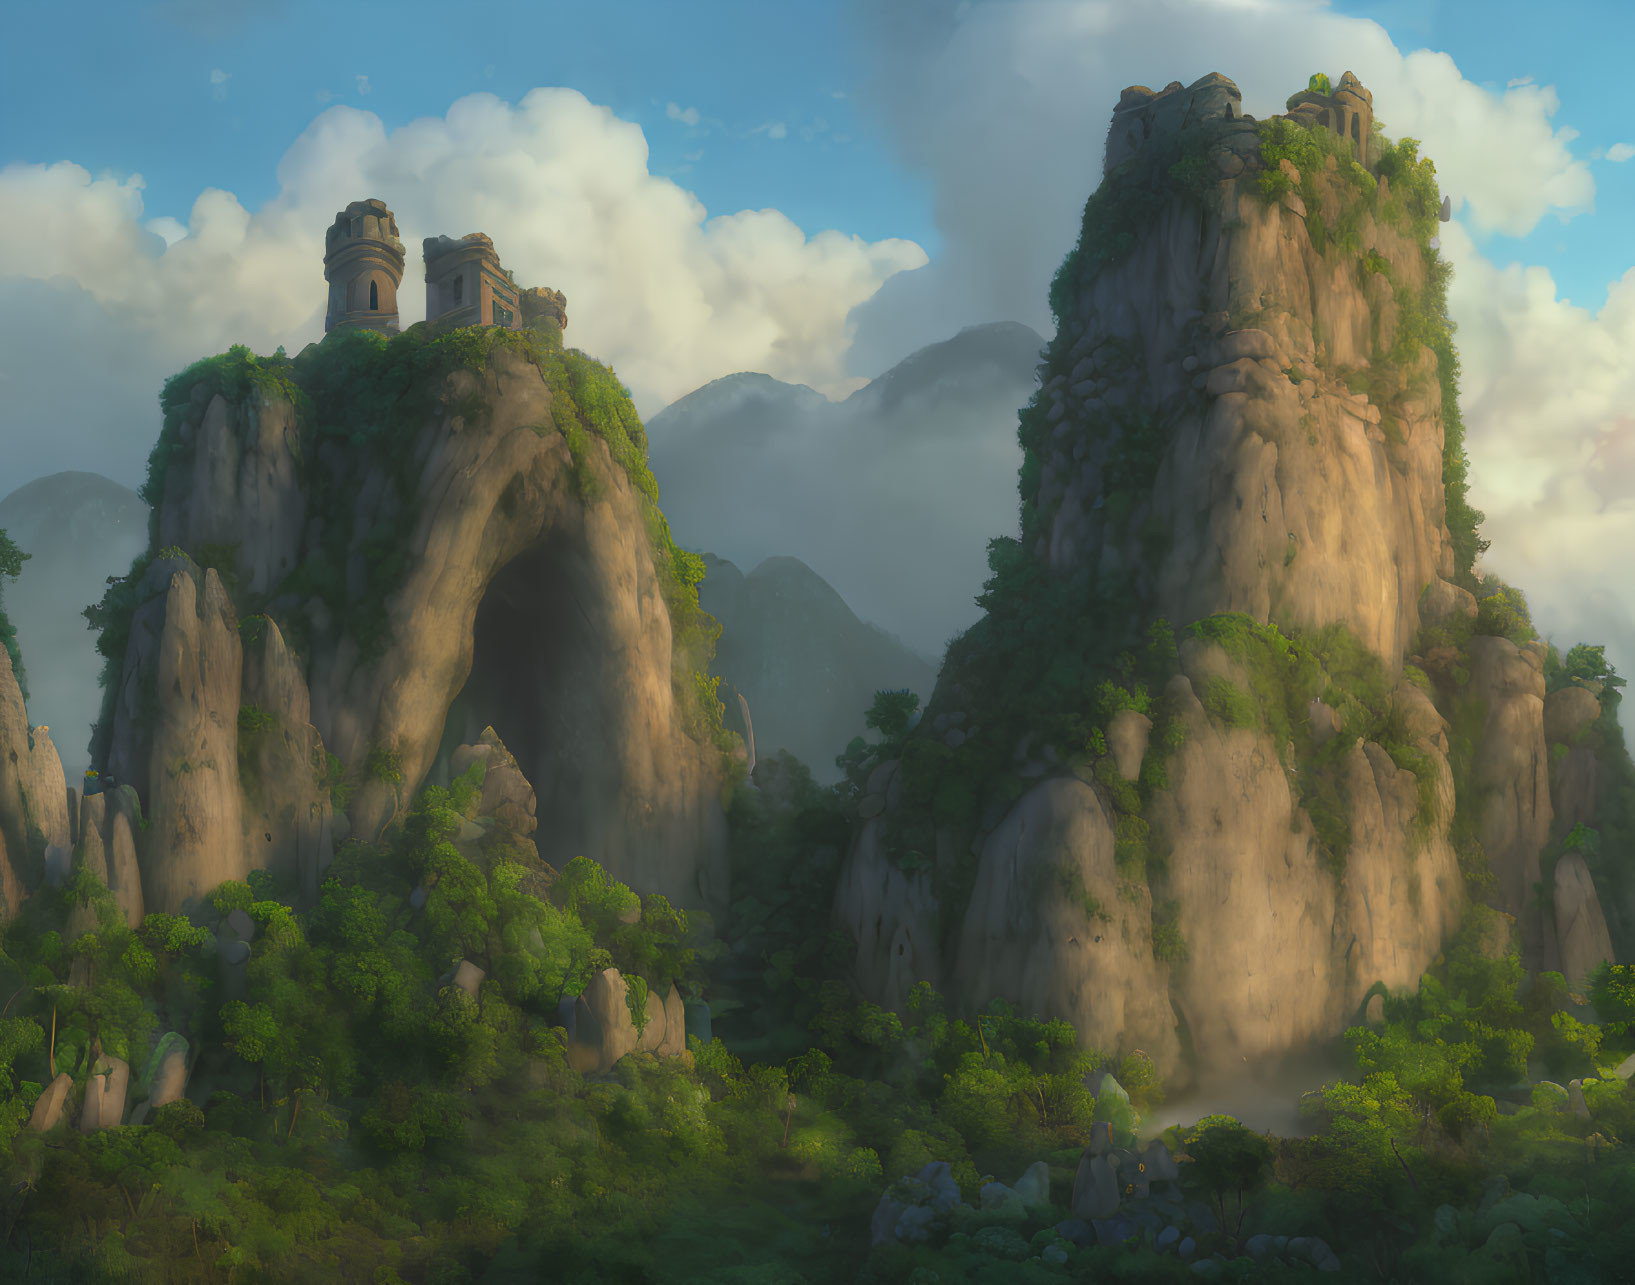 Misty valley with twin peaks and ancient ruins under soft sunlight